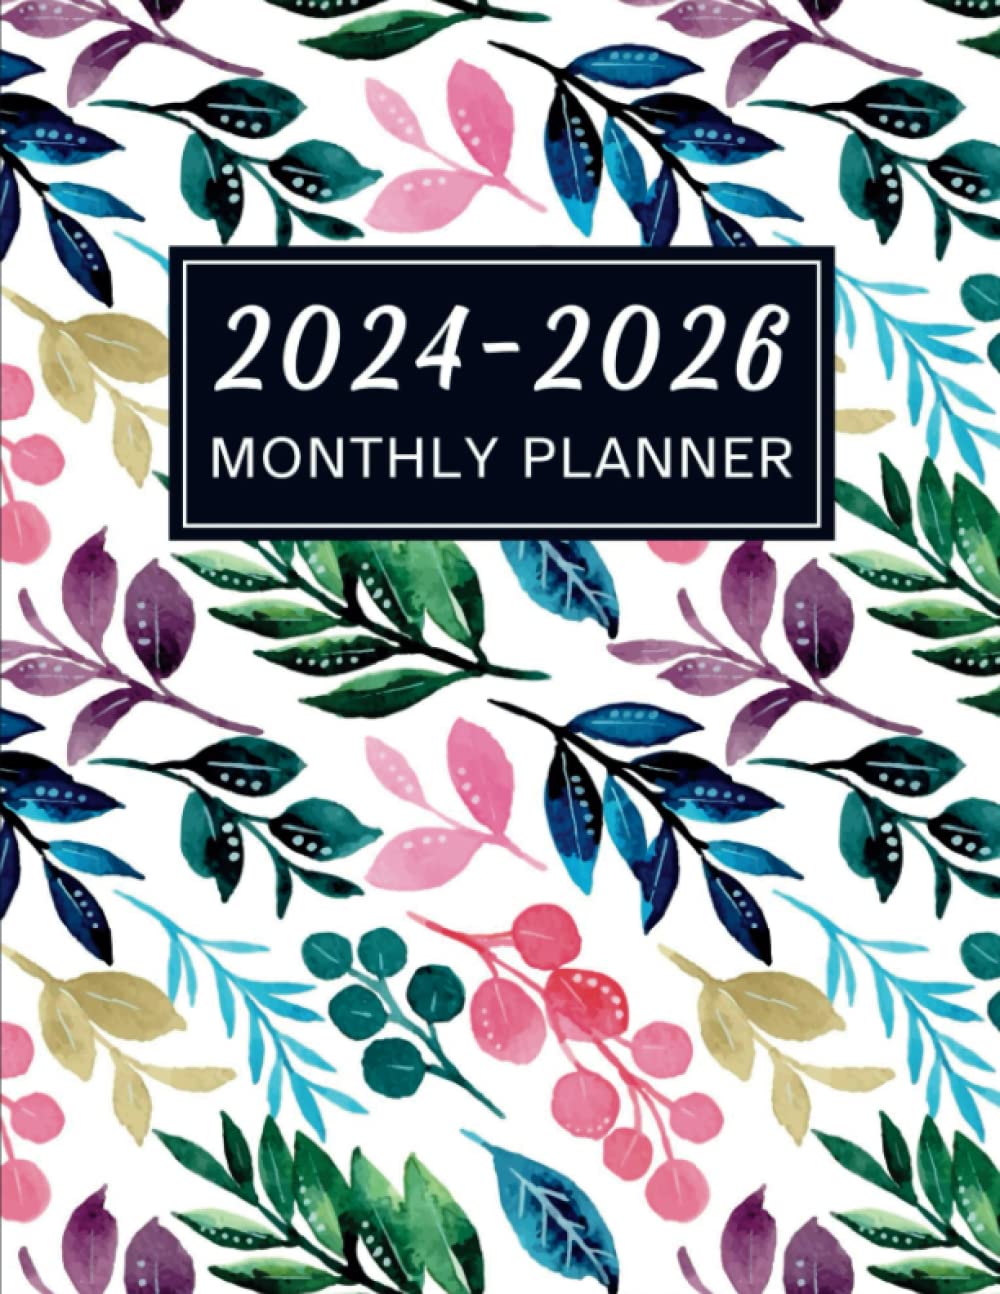 2024-2026 Monthly Planner: 3 years schedule organizer, Personal time management notebook with Flower Cover